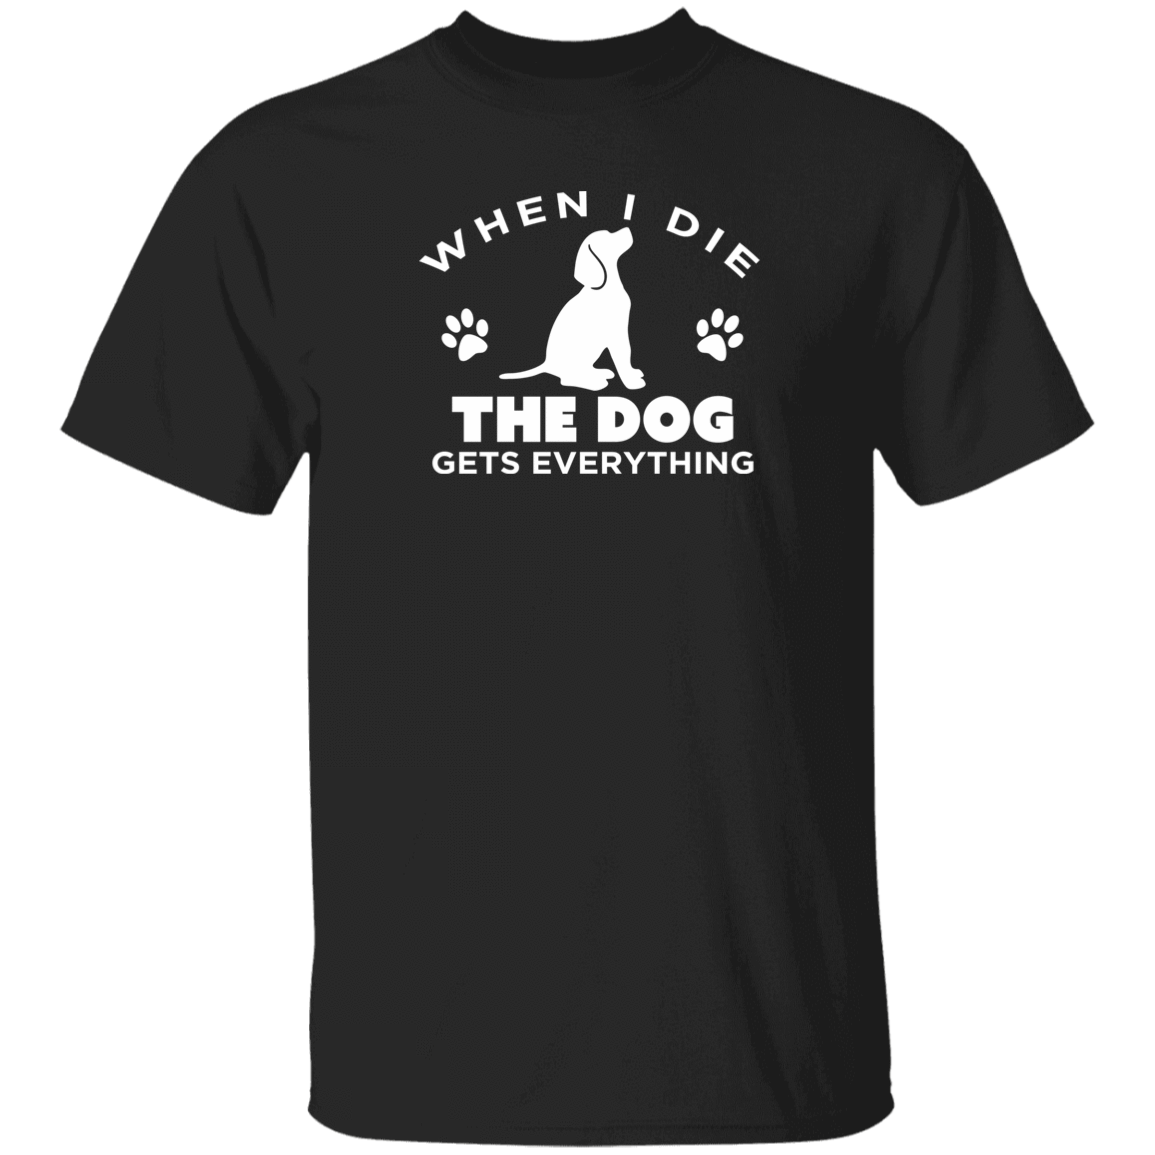 When I Die The Dog Gets Everything - T Shirt.